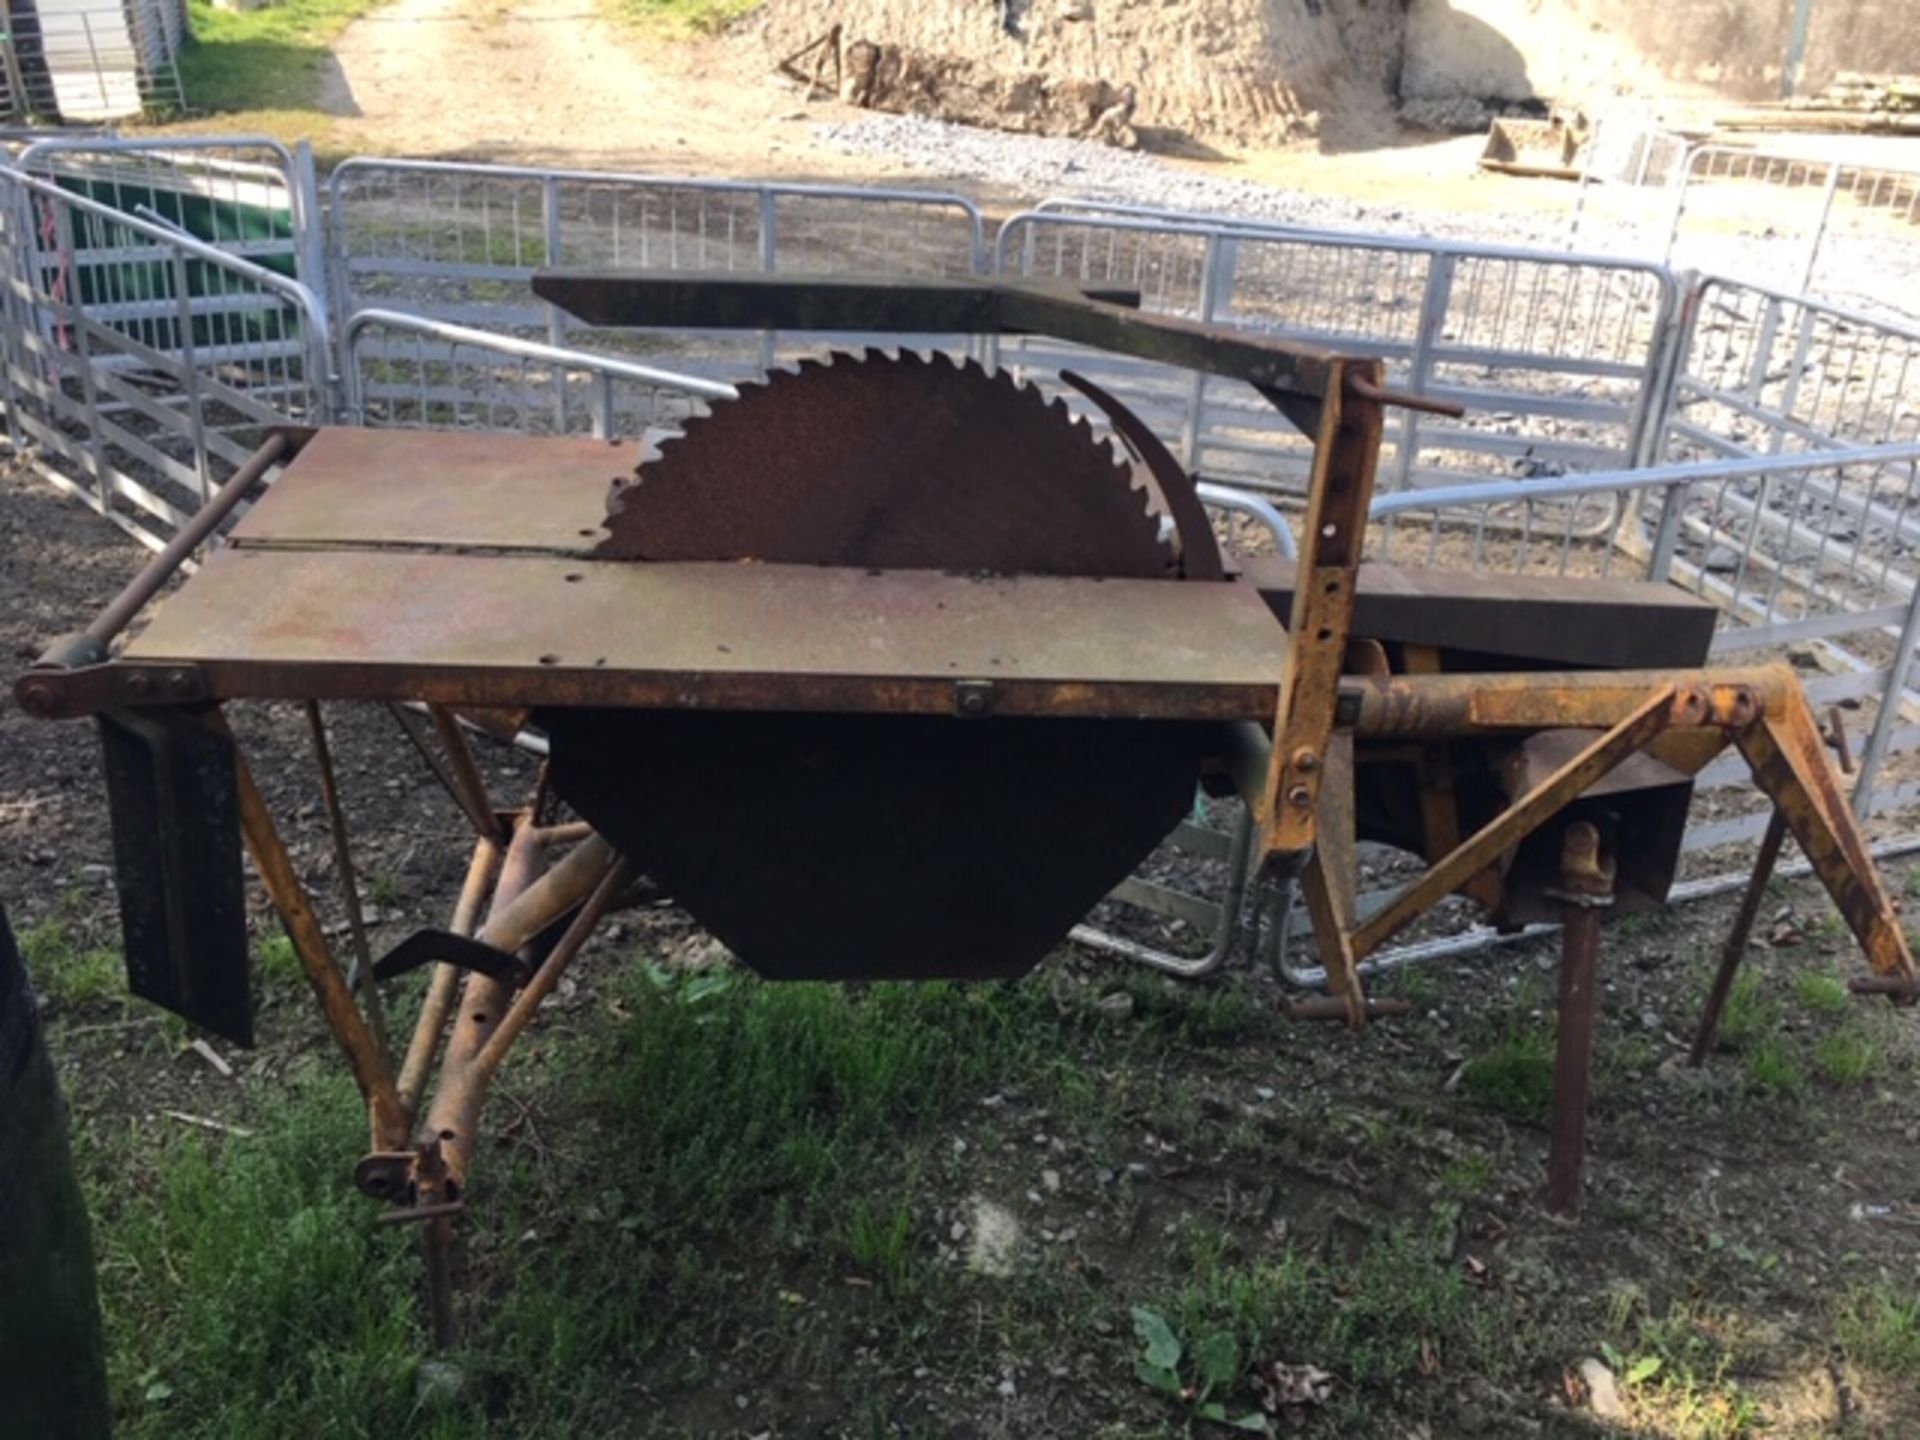 MCONNELL PTO DRIVEN SAWBENCH - Image 2 of 2